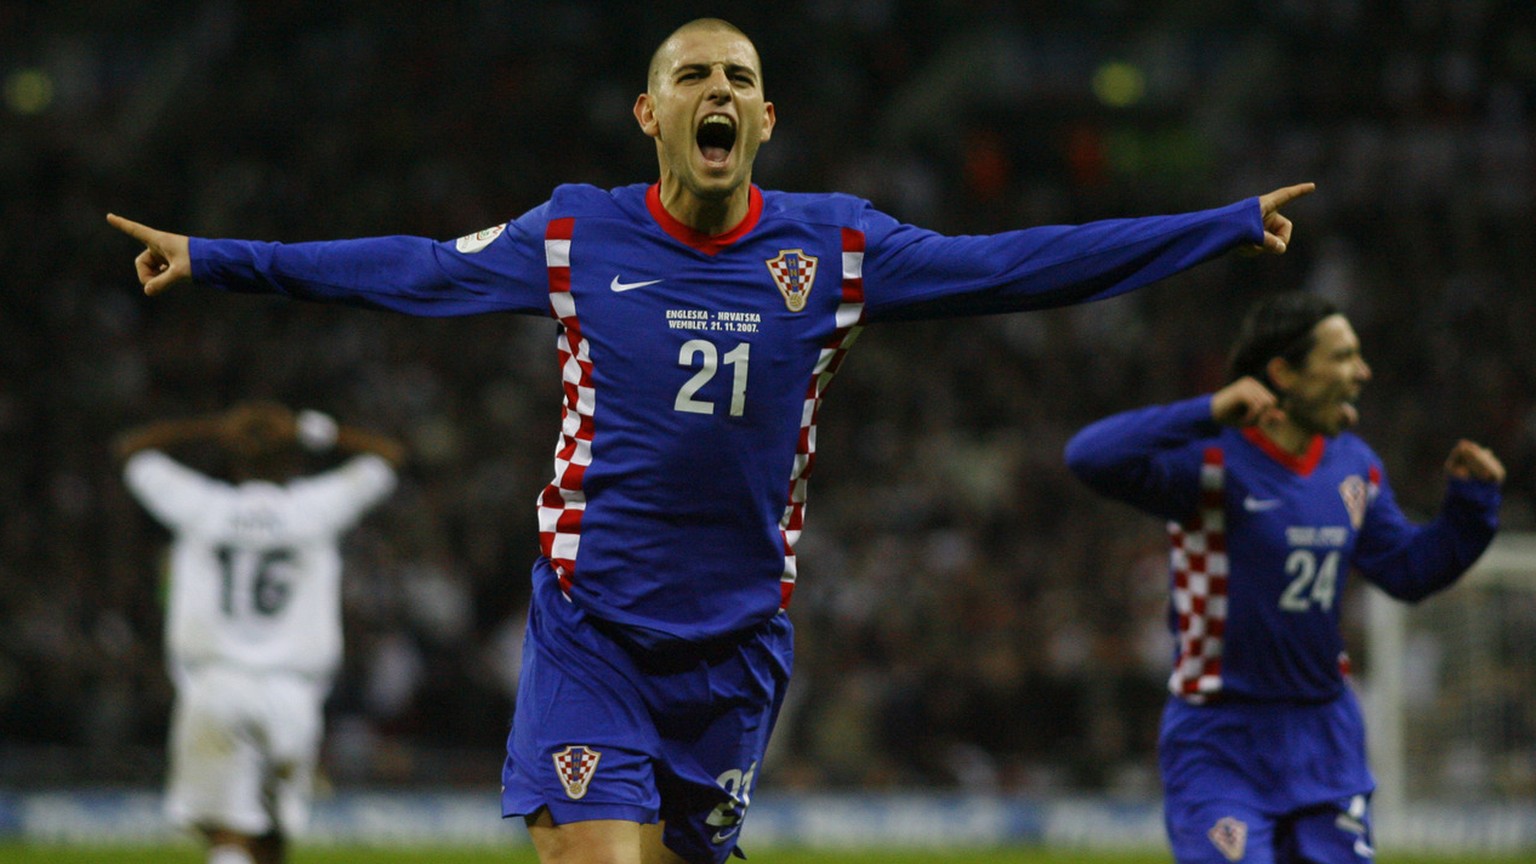 Croatia&#039;s Mladen Petric celebrates after scoring his side&#039;s winning goal during the Euro 2008 group E qualifying soccer match between England and Croatia at Wembley Stadium in London, Wednes ...